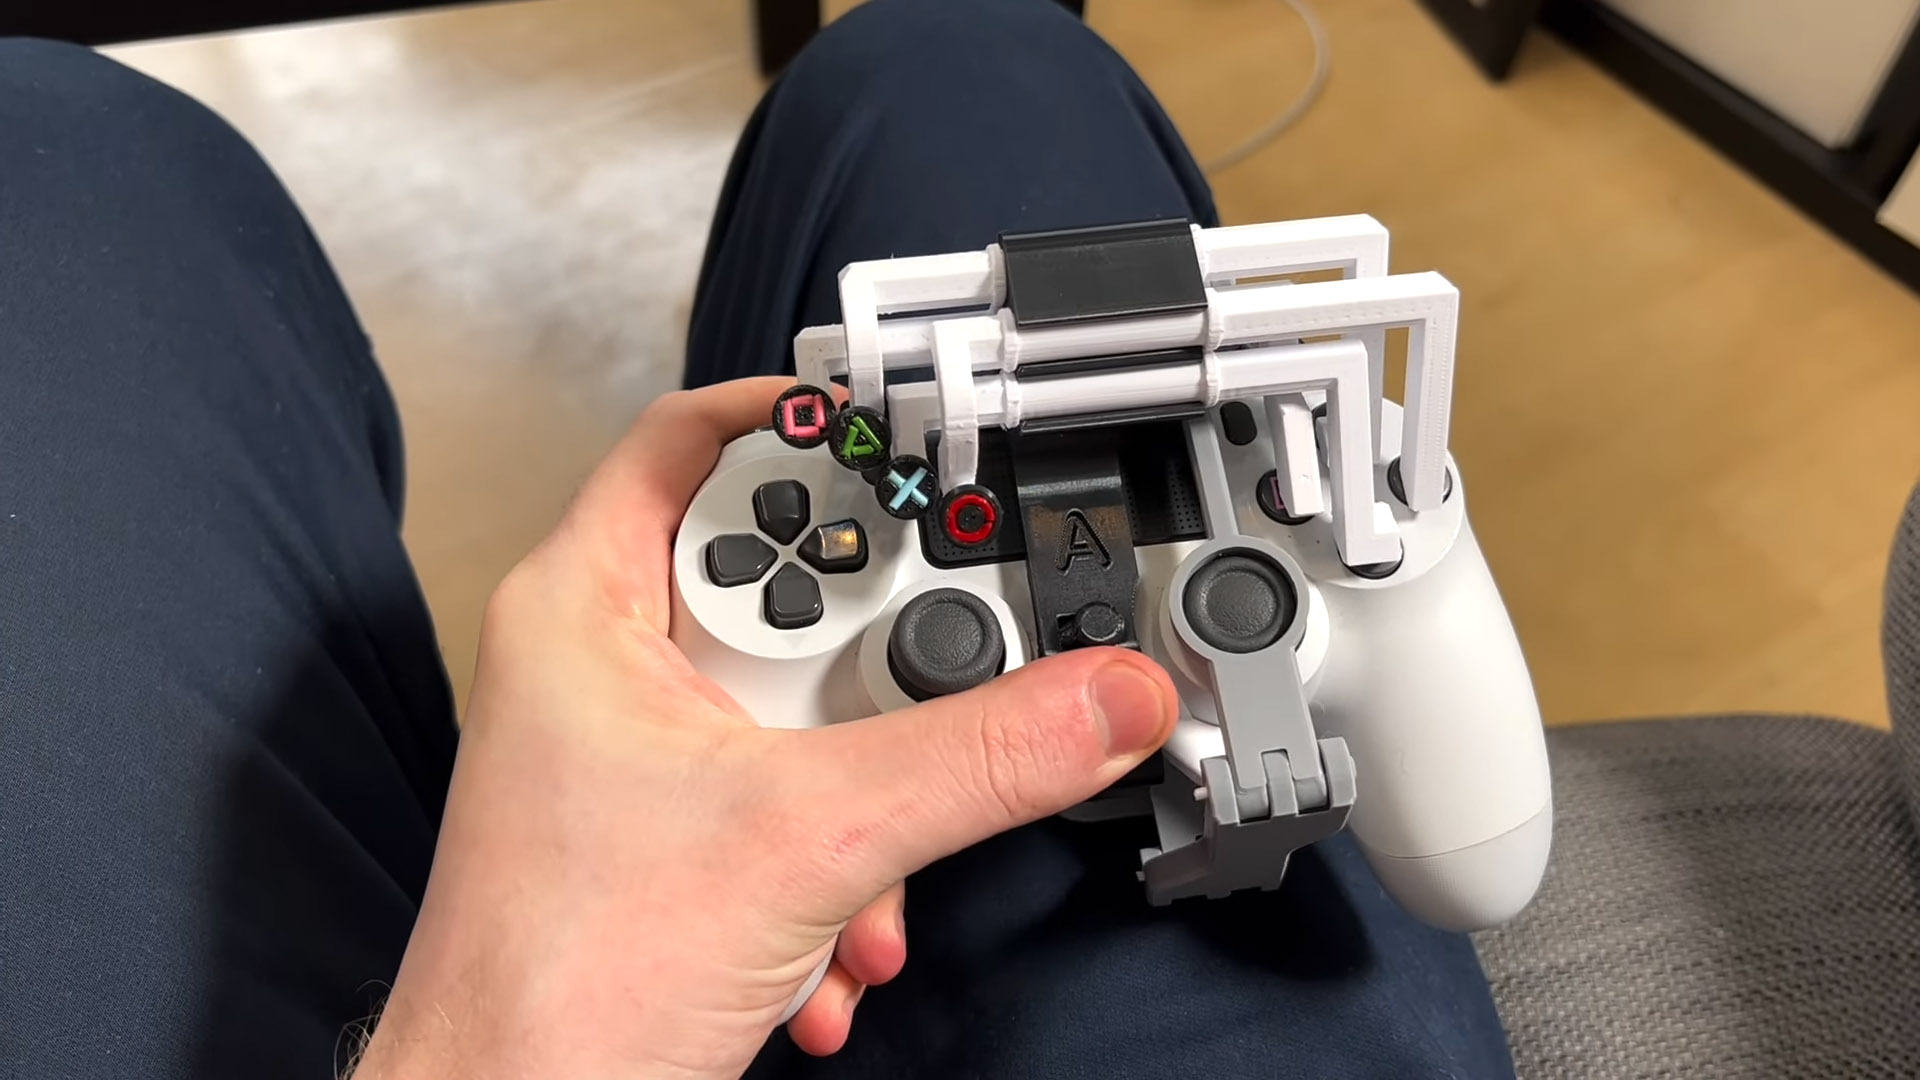 3D-printed PlayStation controller mod allows PS4 and PS5 gaming - NotebookCheck.net News